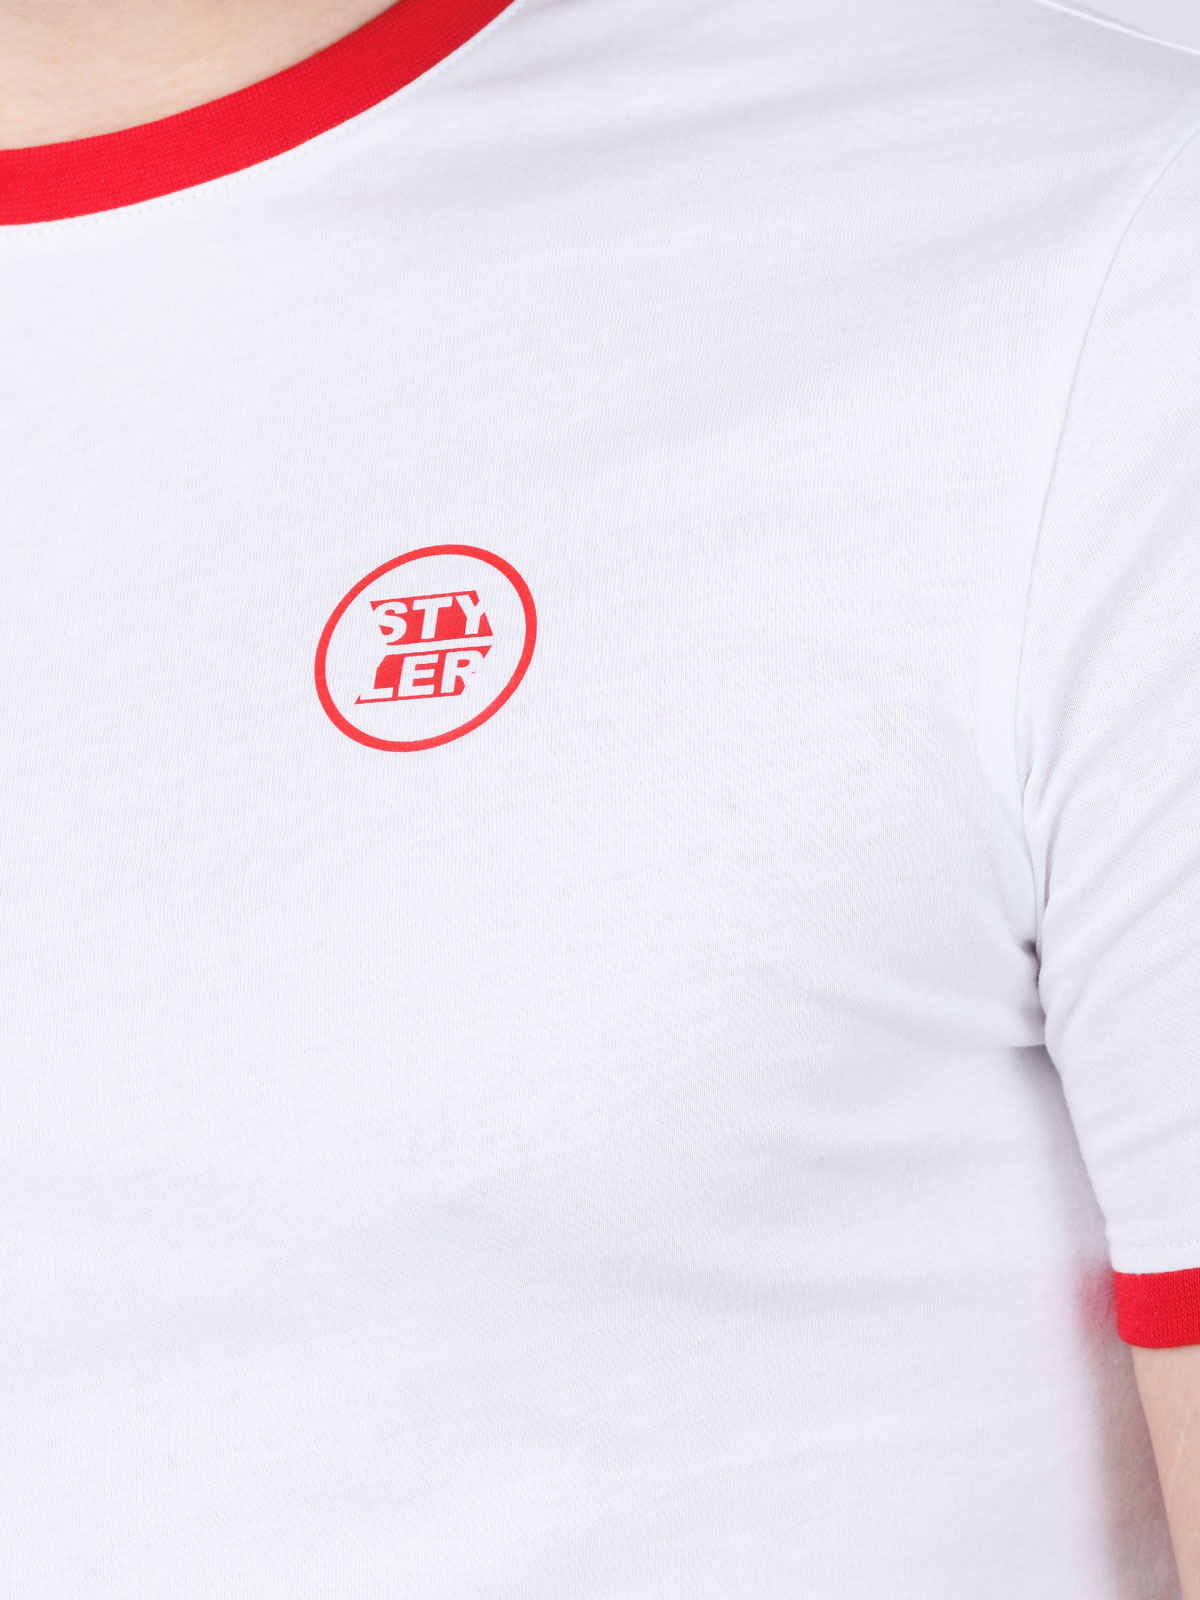 White tshirt with red print - 96456 € 23.62 img2